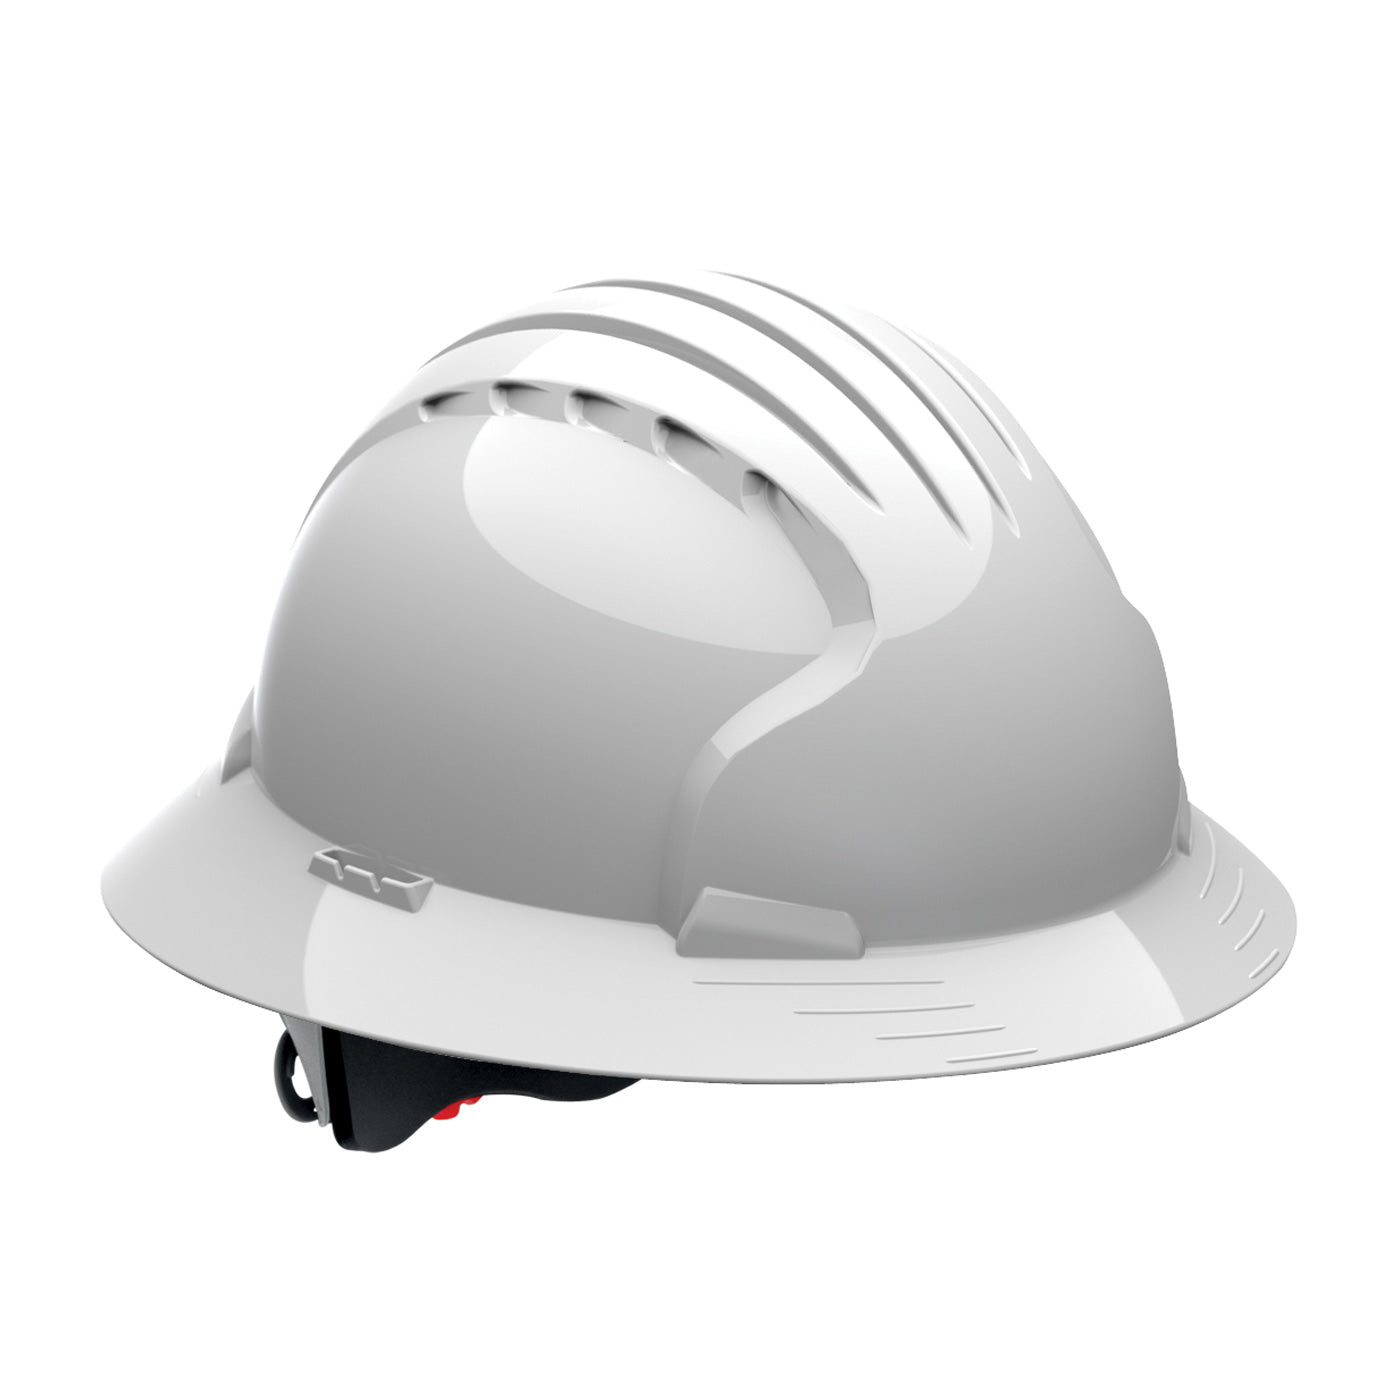 Evolution® Deluxe 6161 Full Brim Hard Hat with HDPE Shell, 6-Point Polyester Suspension and Wheel Ratchet Adjustment